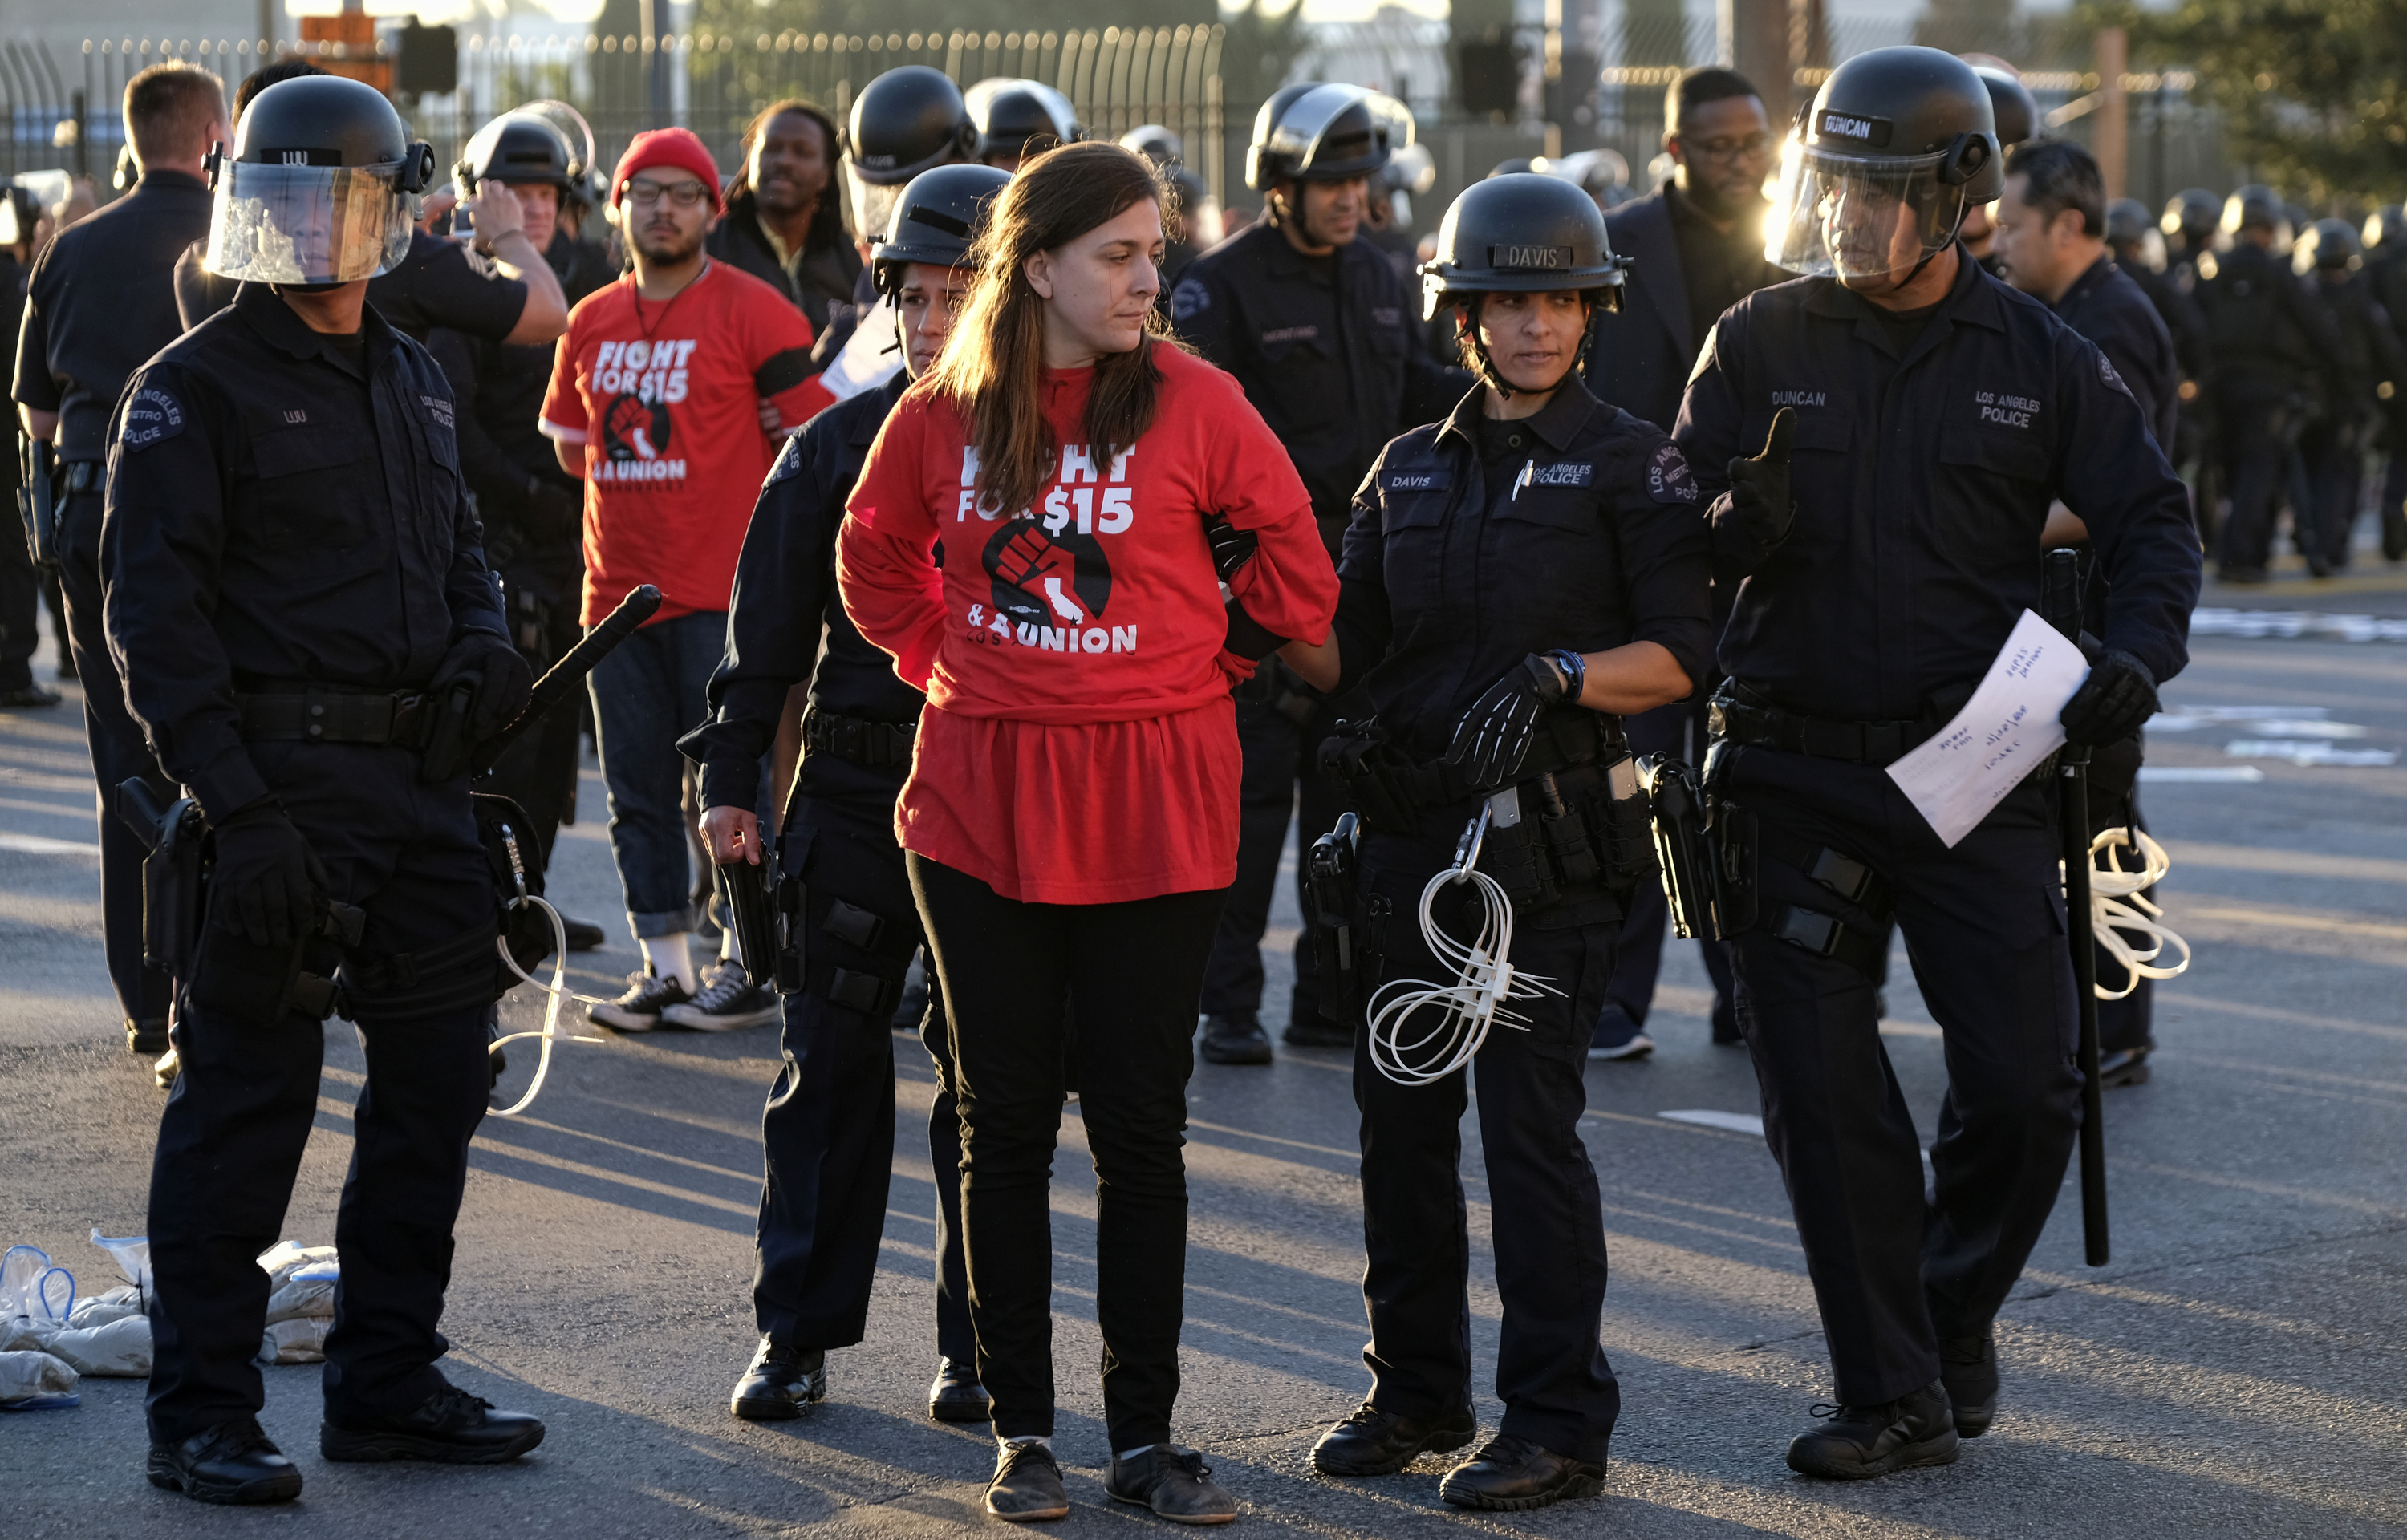 Protesters are arrested and taken into custody during a wage protest in dow...